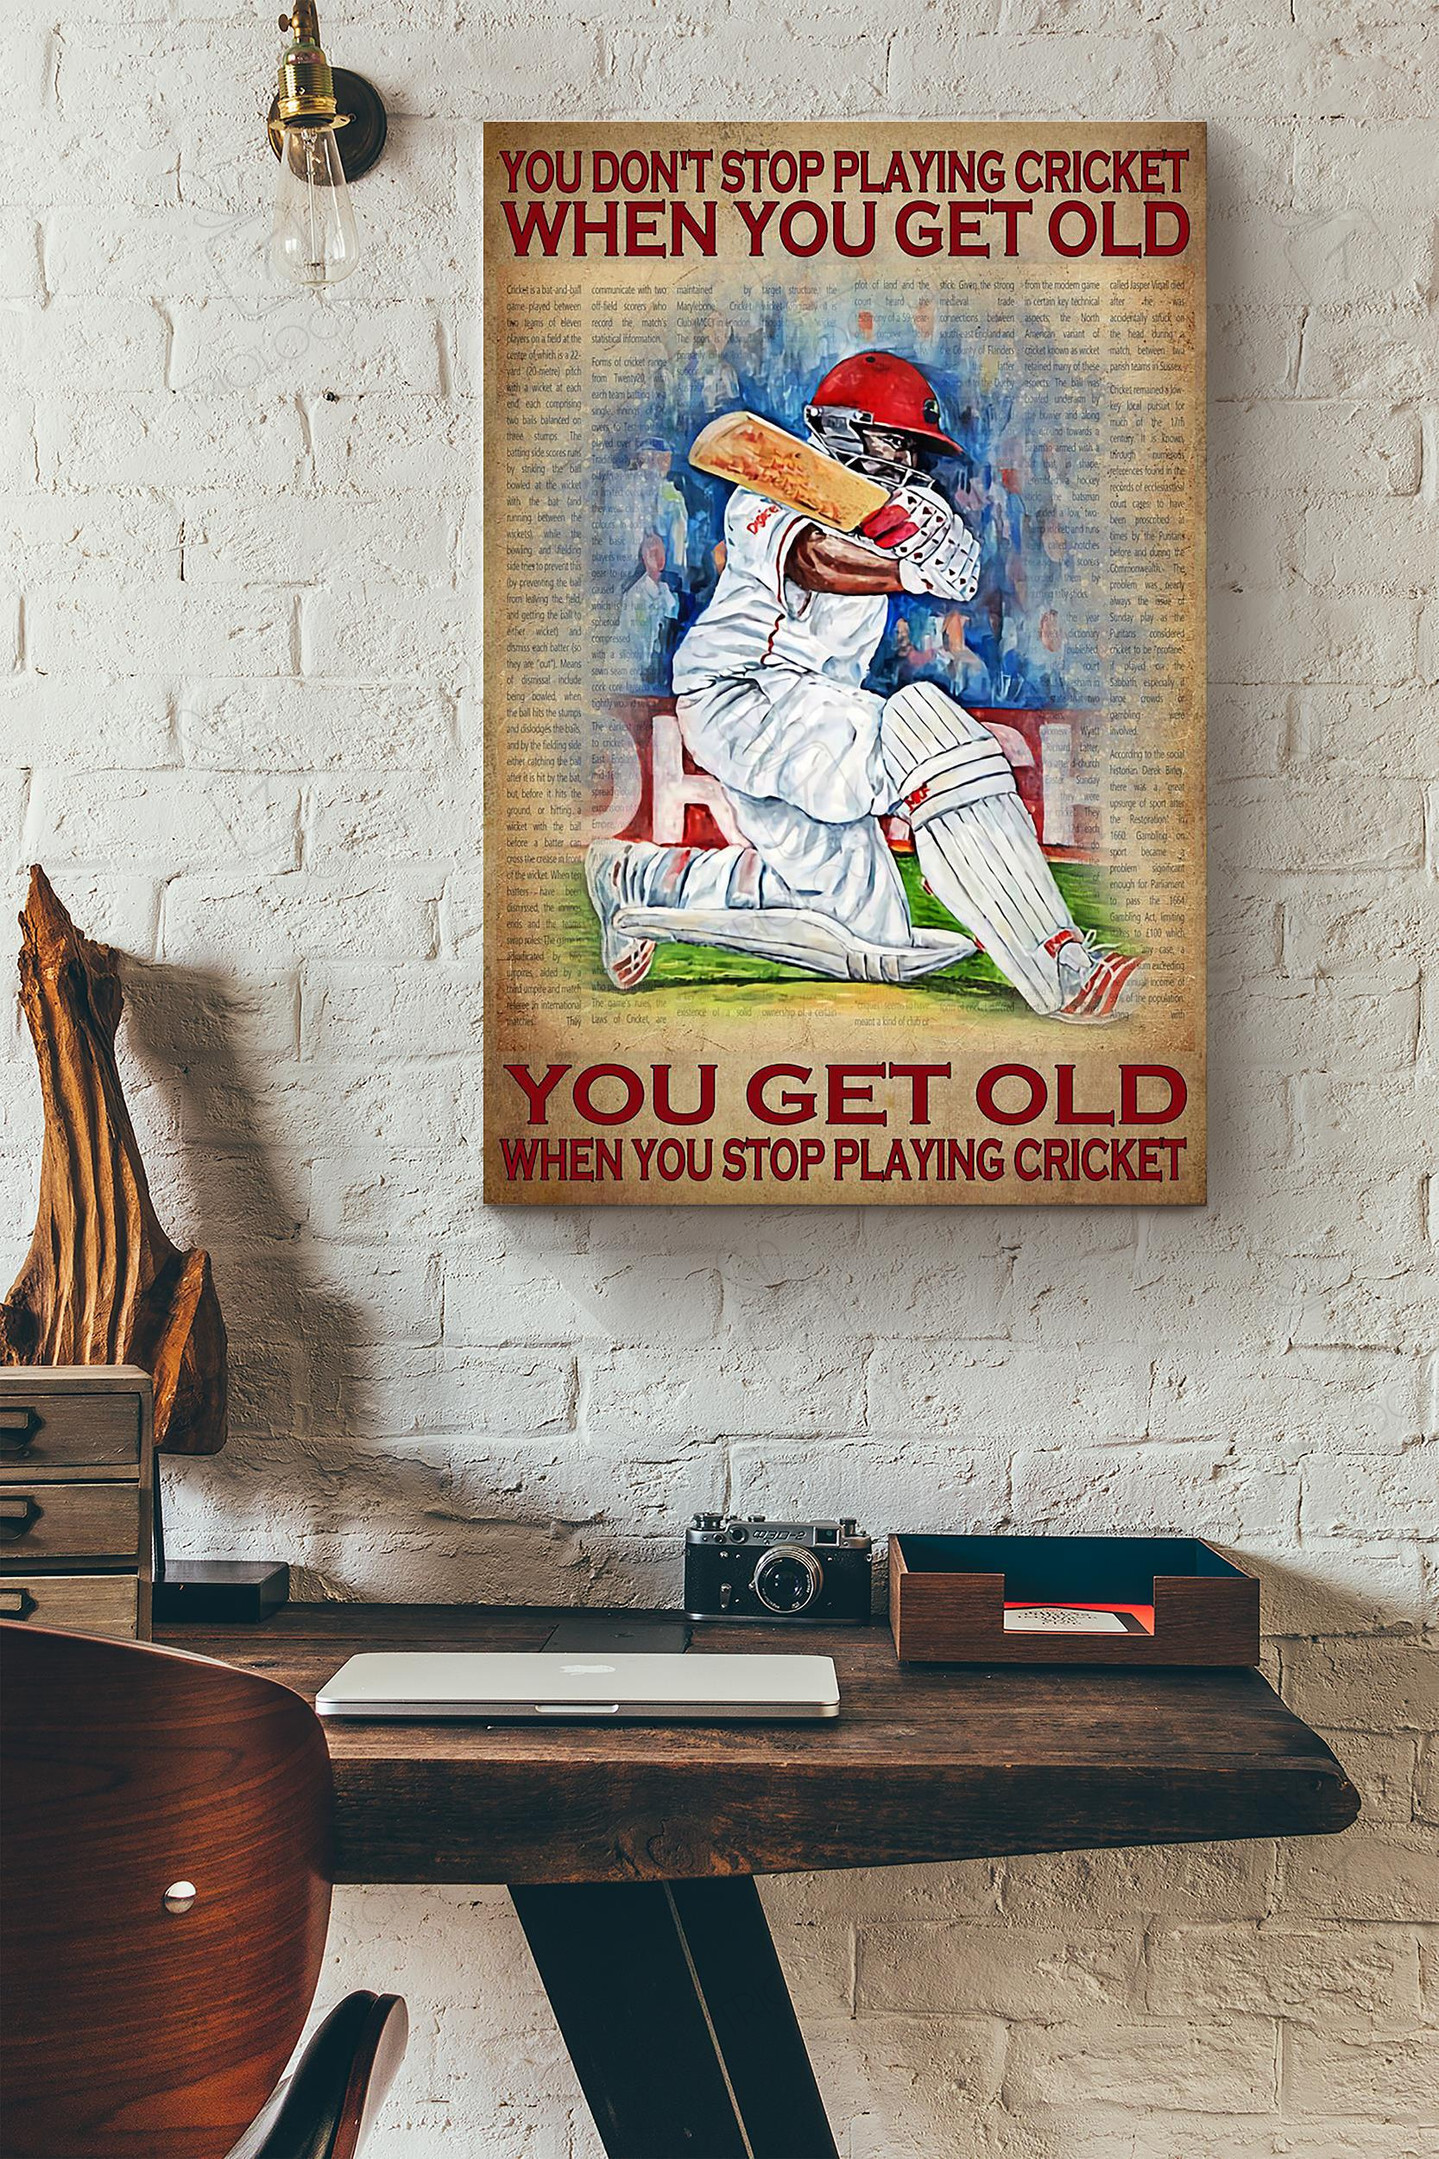 You Dont Stop Playing Cricket Games When You Get Old You Get Old When You Stop Playing Cricket Games Canvas Painting Ideas, Canvas Hanging Prints, Gift Idea Framed Prints, Canvas Paintings Wrapped Canvas 8x10